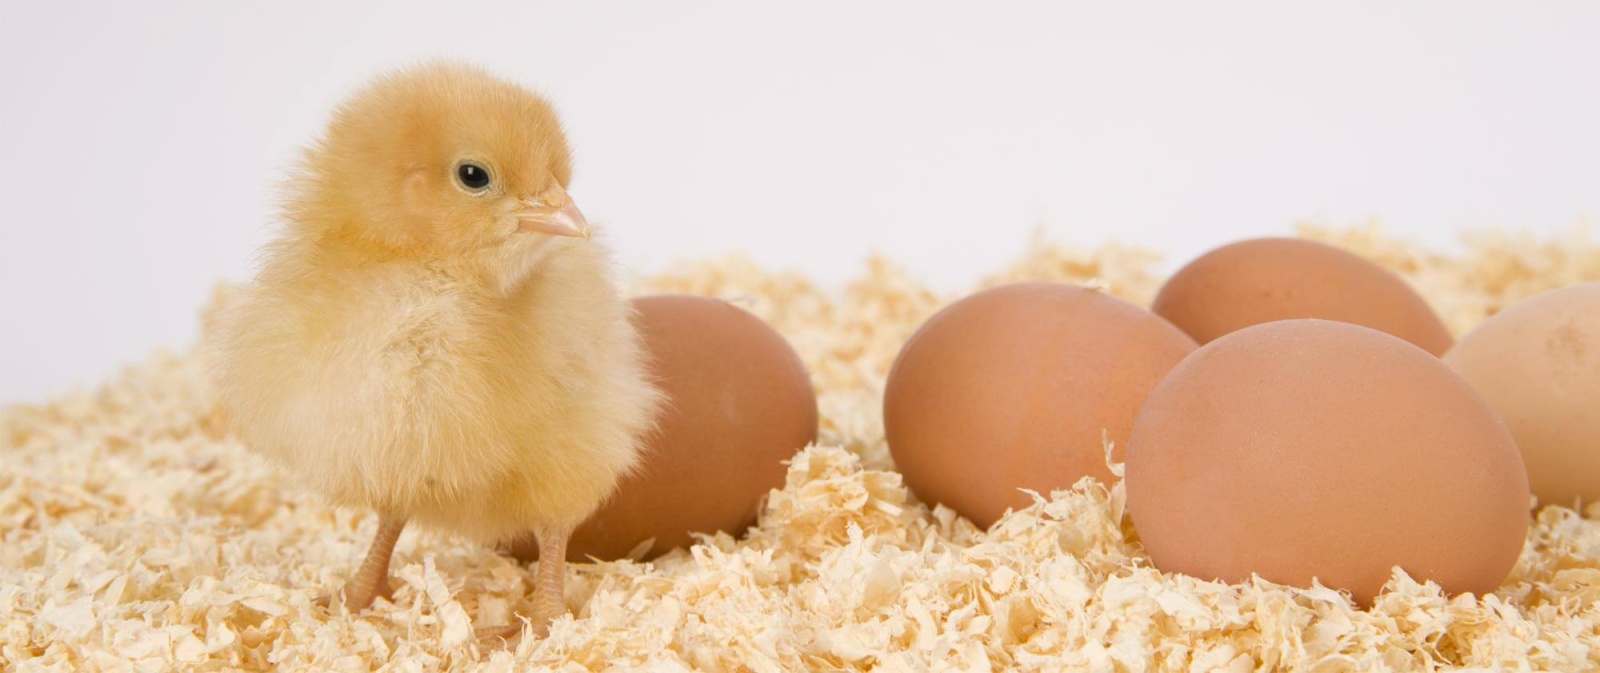 Fluffy, yellow baby chick standing next to chicken eggs on animal bedding made from wood shavings